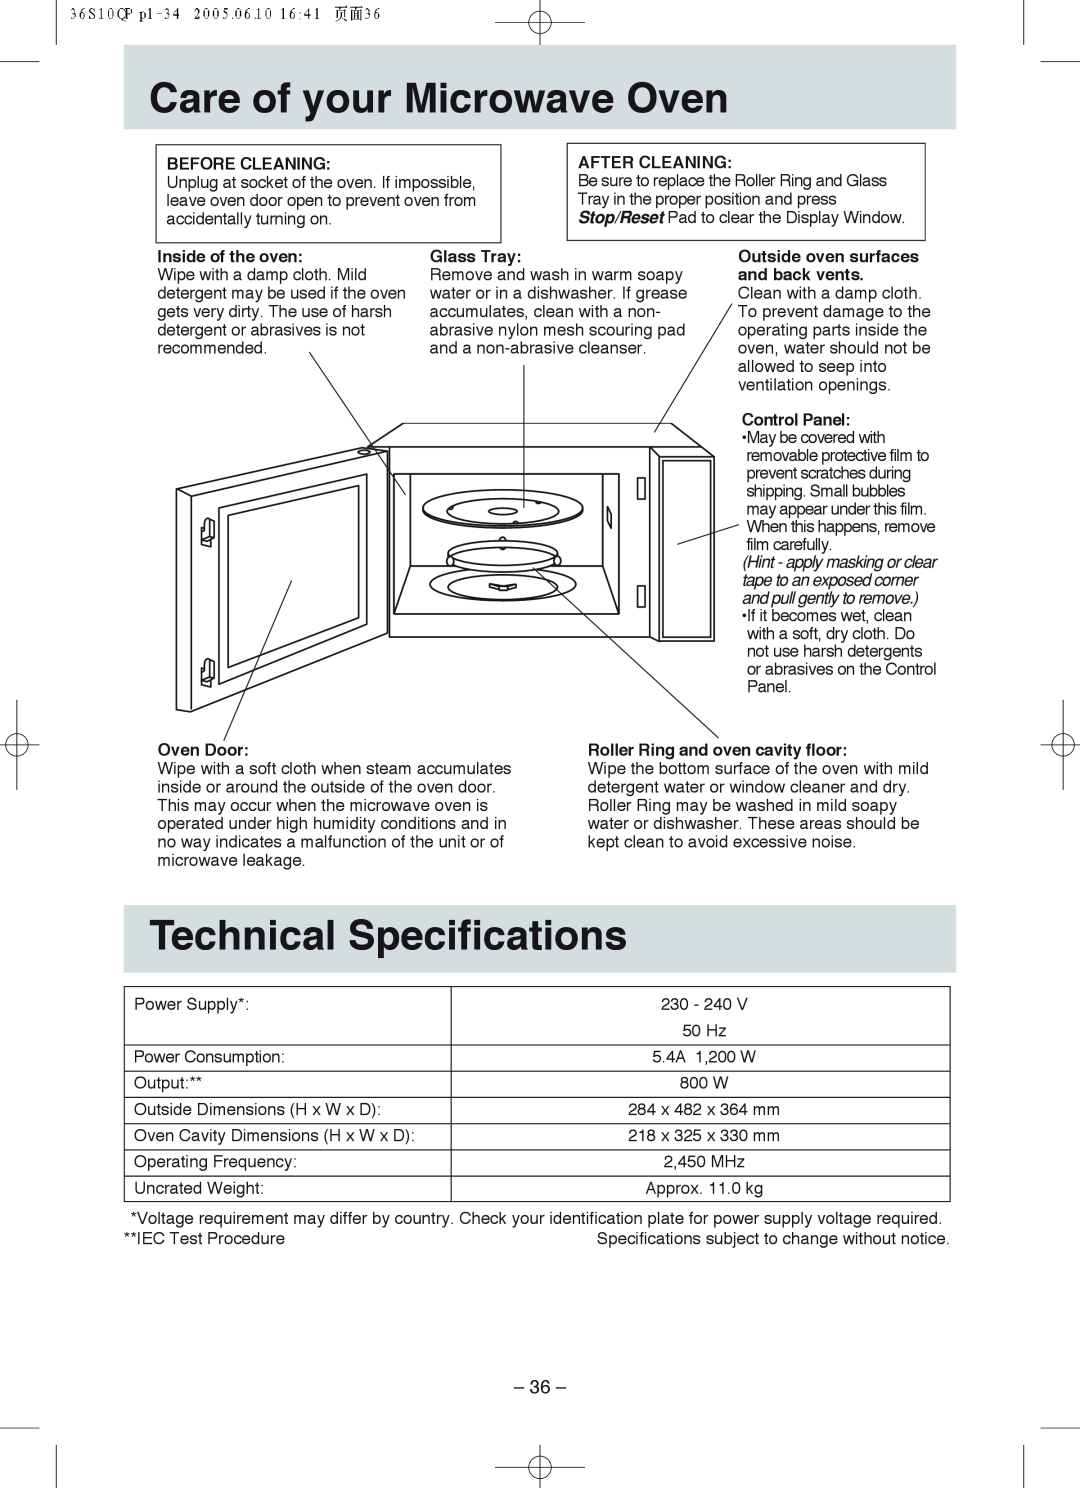 Panasonic NN-S215 manual Care of your Microwave Oven, Technical Specifications, Before Cleaning, After Cleaning, Glass Tray 